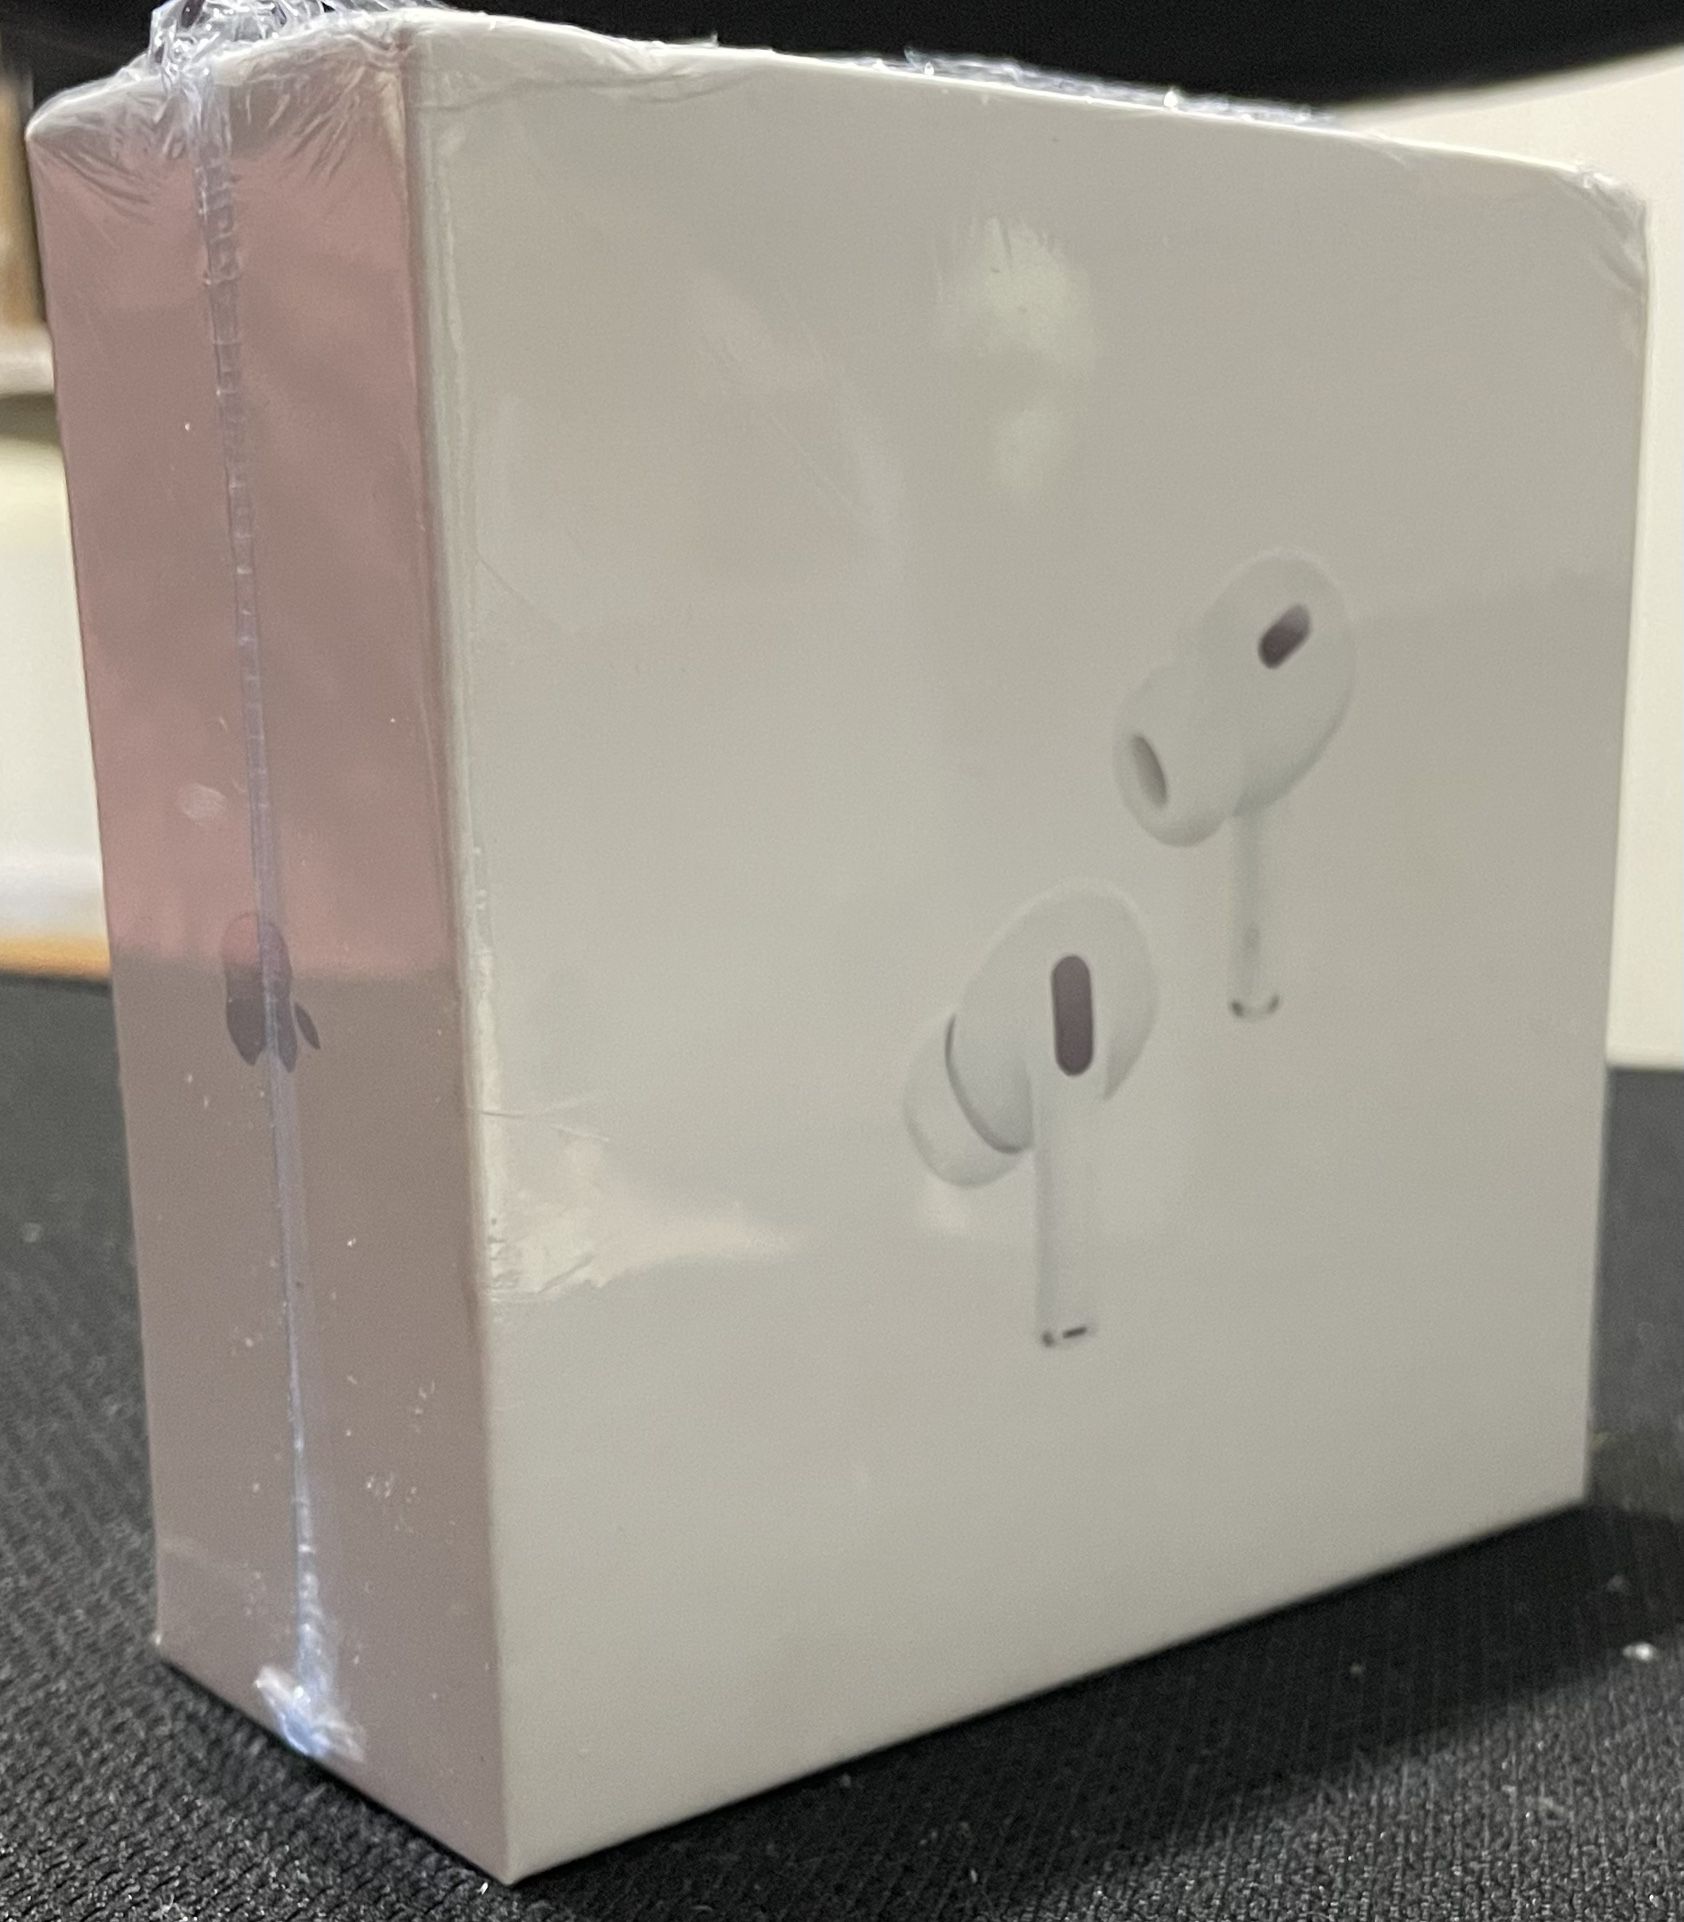 APPLE AIRPODS PRO 2ND GENERATION 